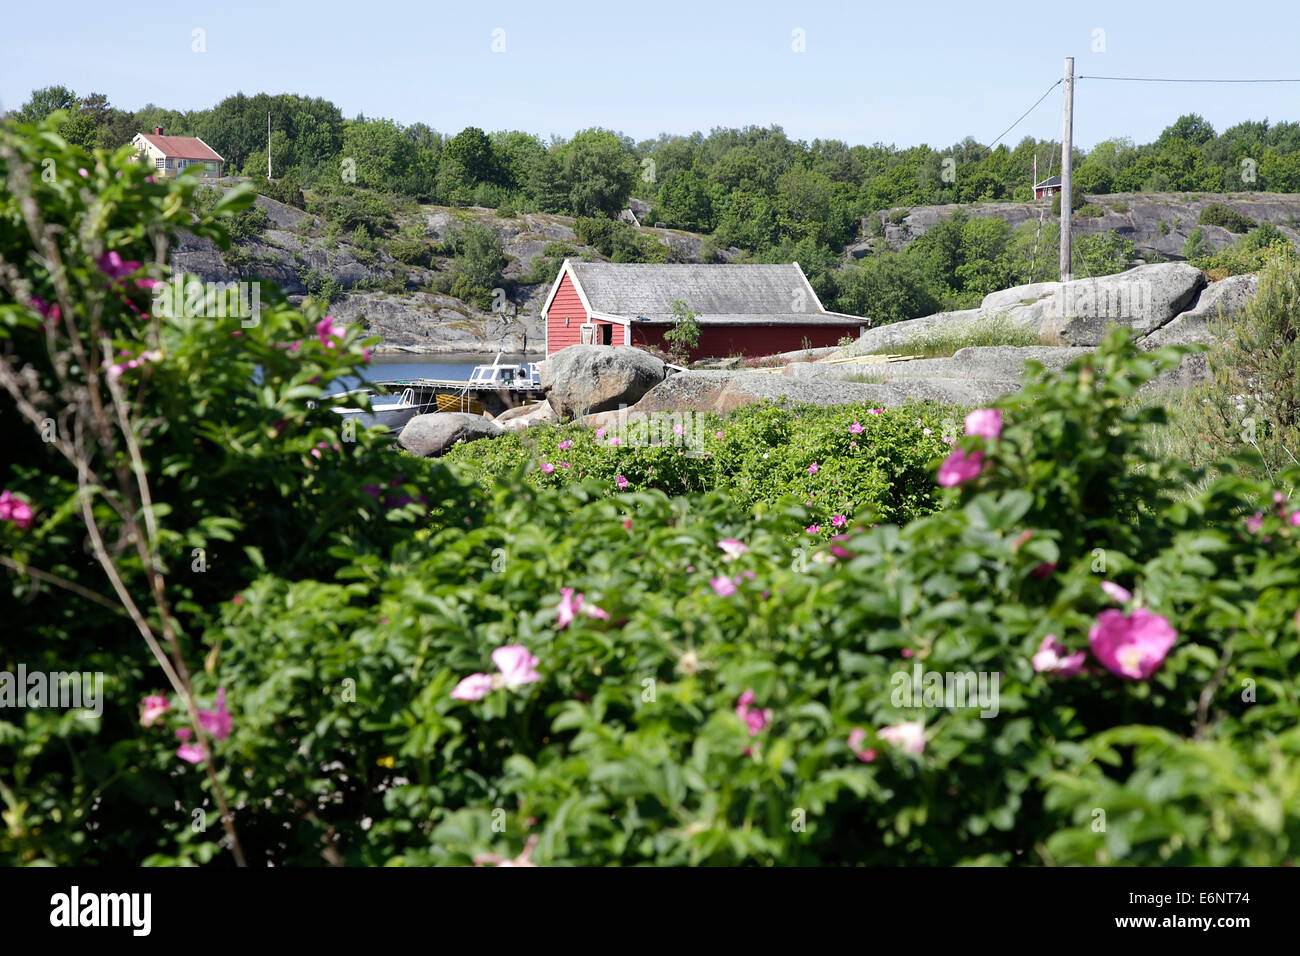 Idyllic scenery of water and cottages in Hvasserveien, which belongs to the municipality of Sandefjord in Norway. Photo: Klaus Nowottnick Date: 01.06.2014 Stock Photo